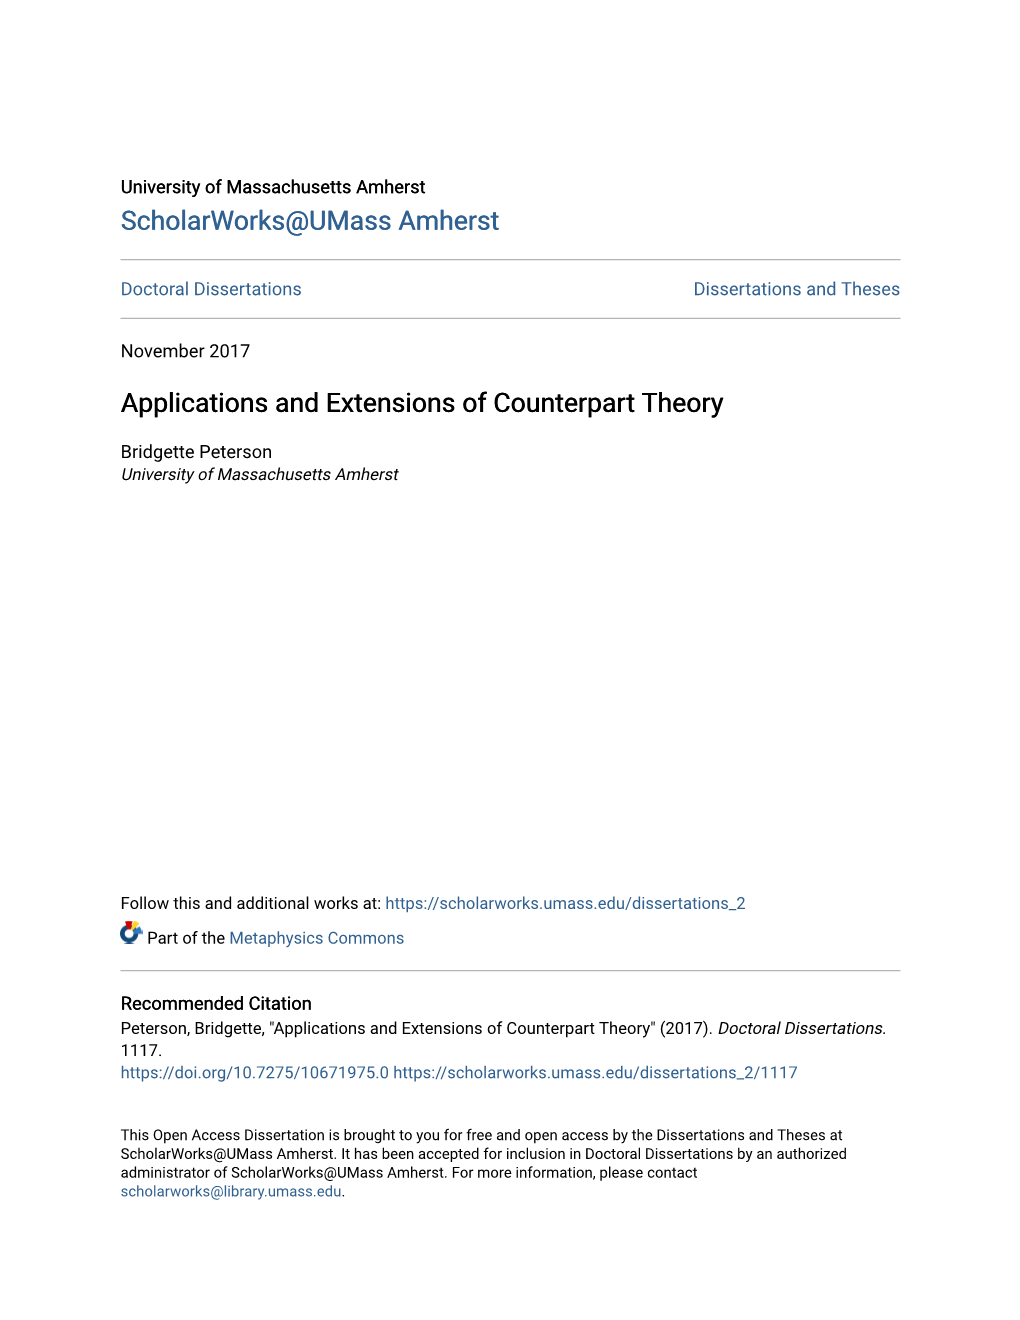 Applications and Extensions of Counterpart Theory